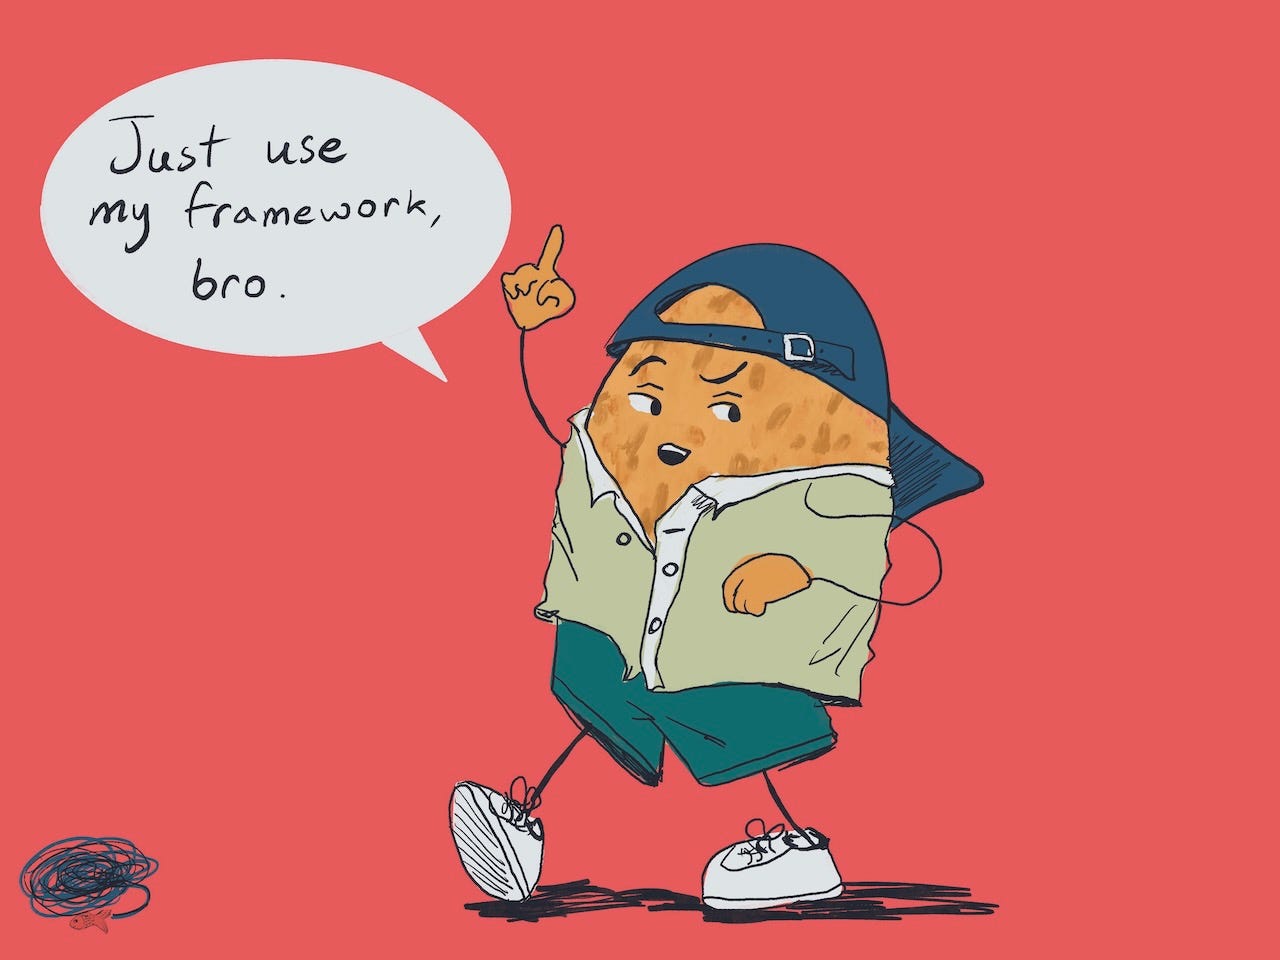 Original illustration of a potato dressed in typical tech worker clothes, pointing their finger up in unwarranted confidence. Speech bubble states: "just use my framework, bro".